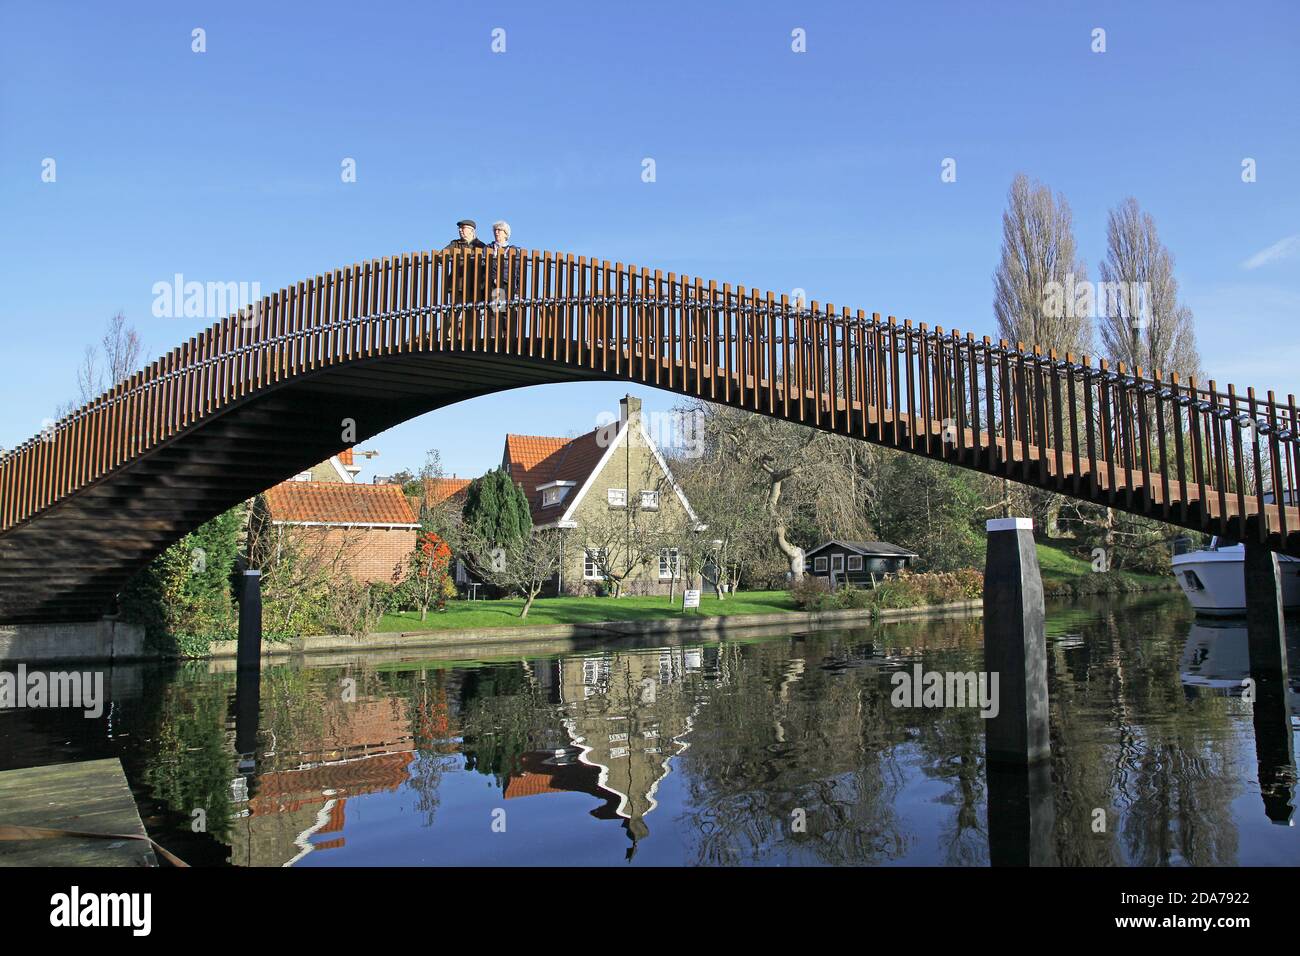 Steel bridge over ''The Utrechtse Veer'' in the city of Leiden.This is part of the City Walk around the city centre called Stadspark.Loop around the city.The Netherlands. Stock Photo